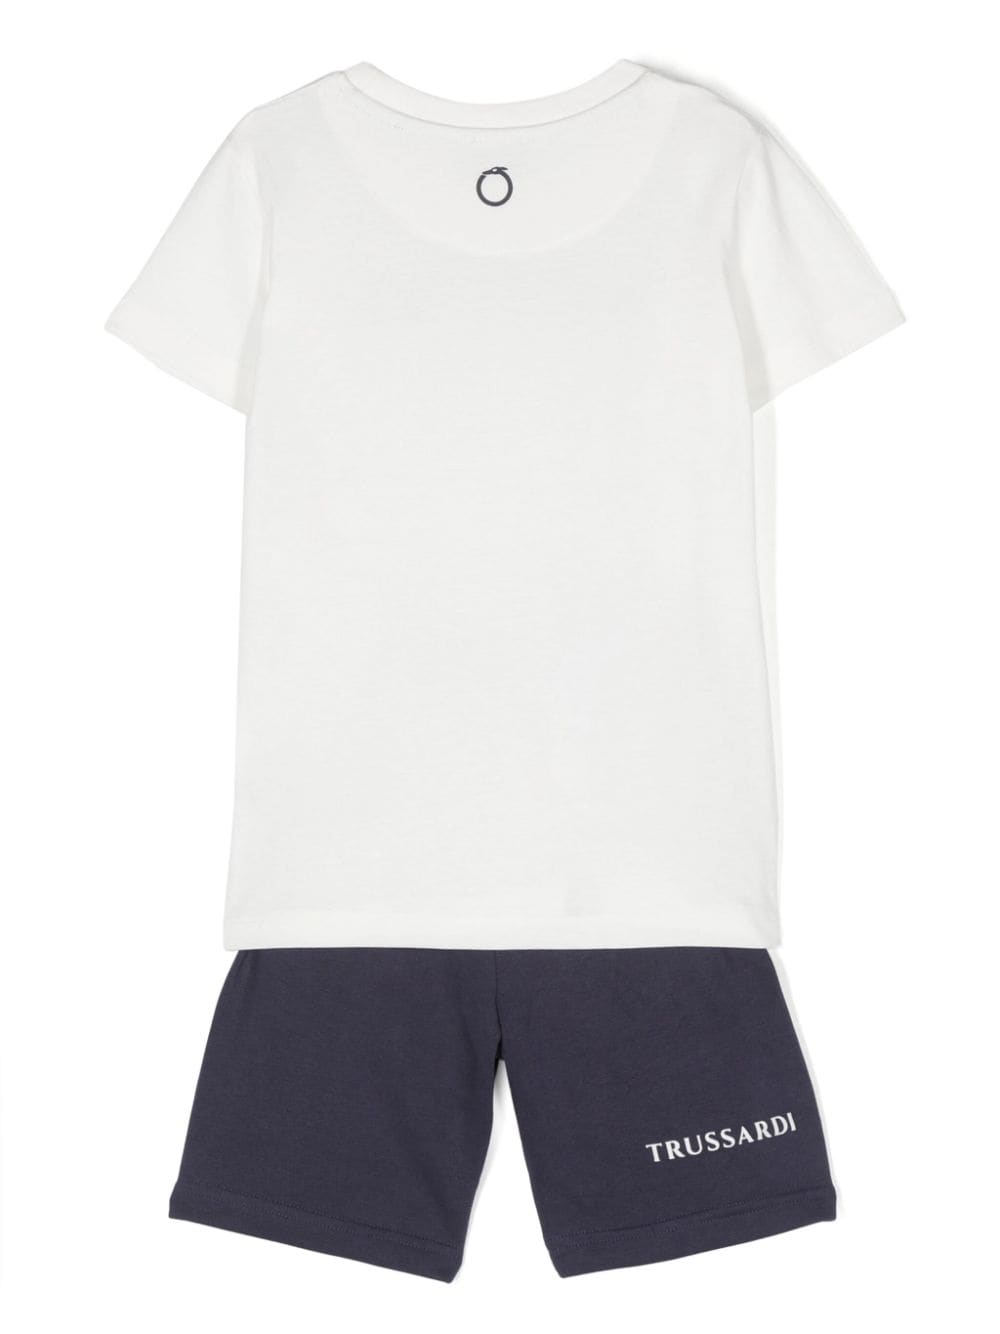 Blue and white sports outfit for children with logo